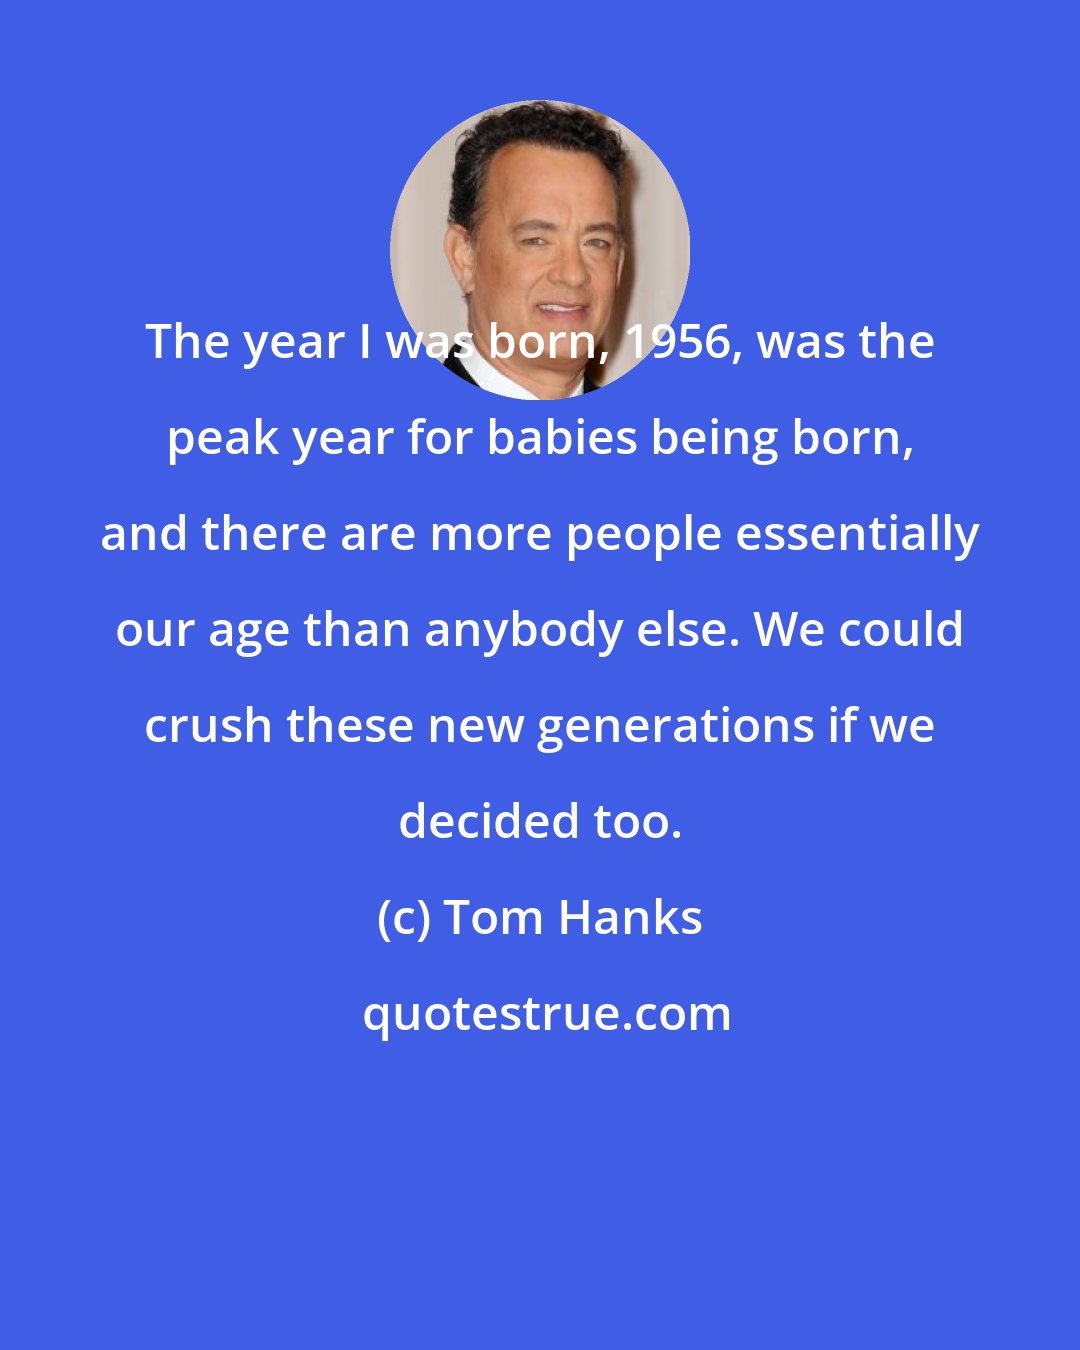 Tom Hanks: The year I was born, 1956, was the peak year for babies being born, and there are more people essentially our age than anybody else. We could crush these new generations if we decided too.